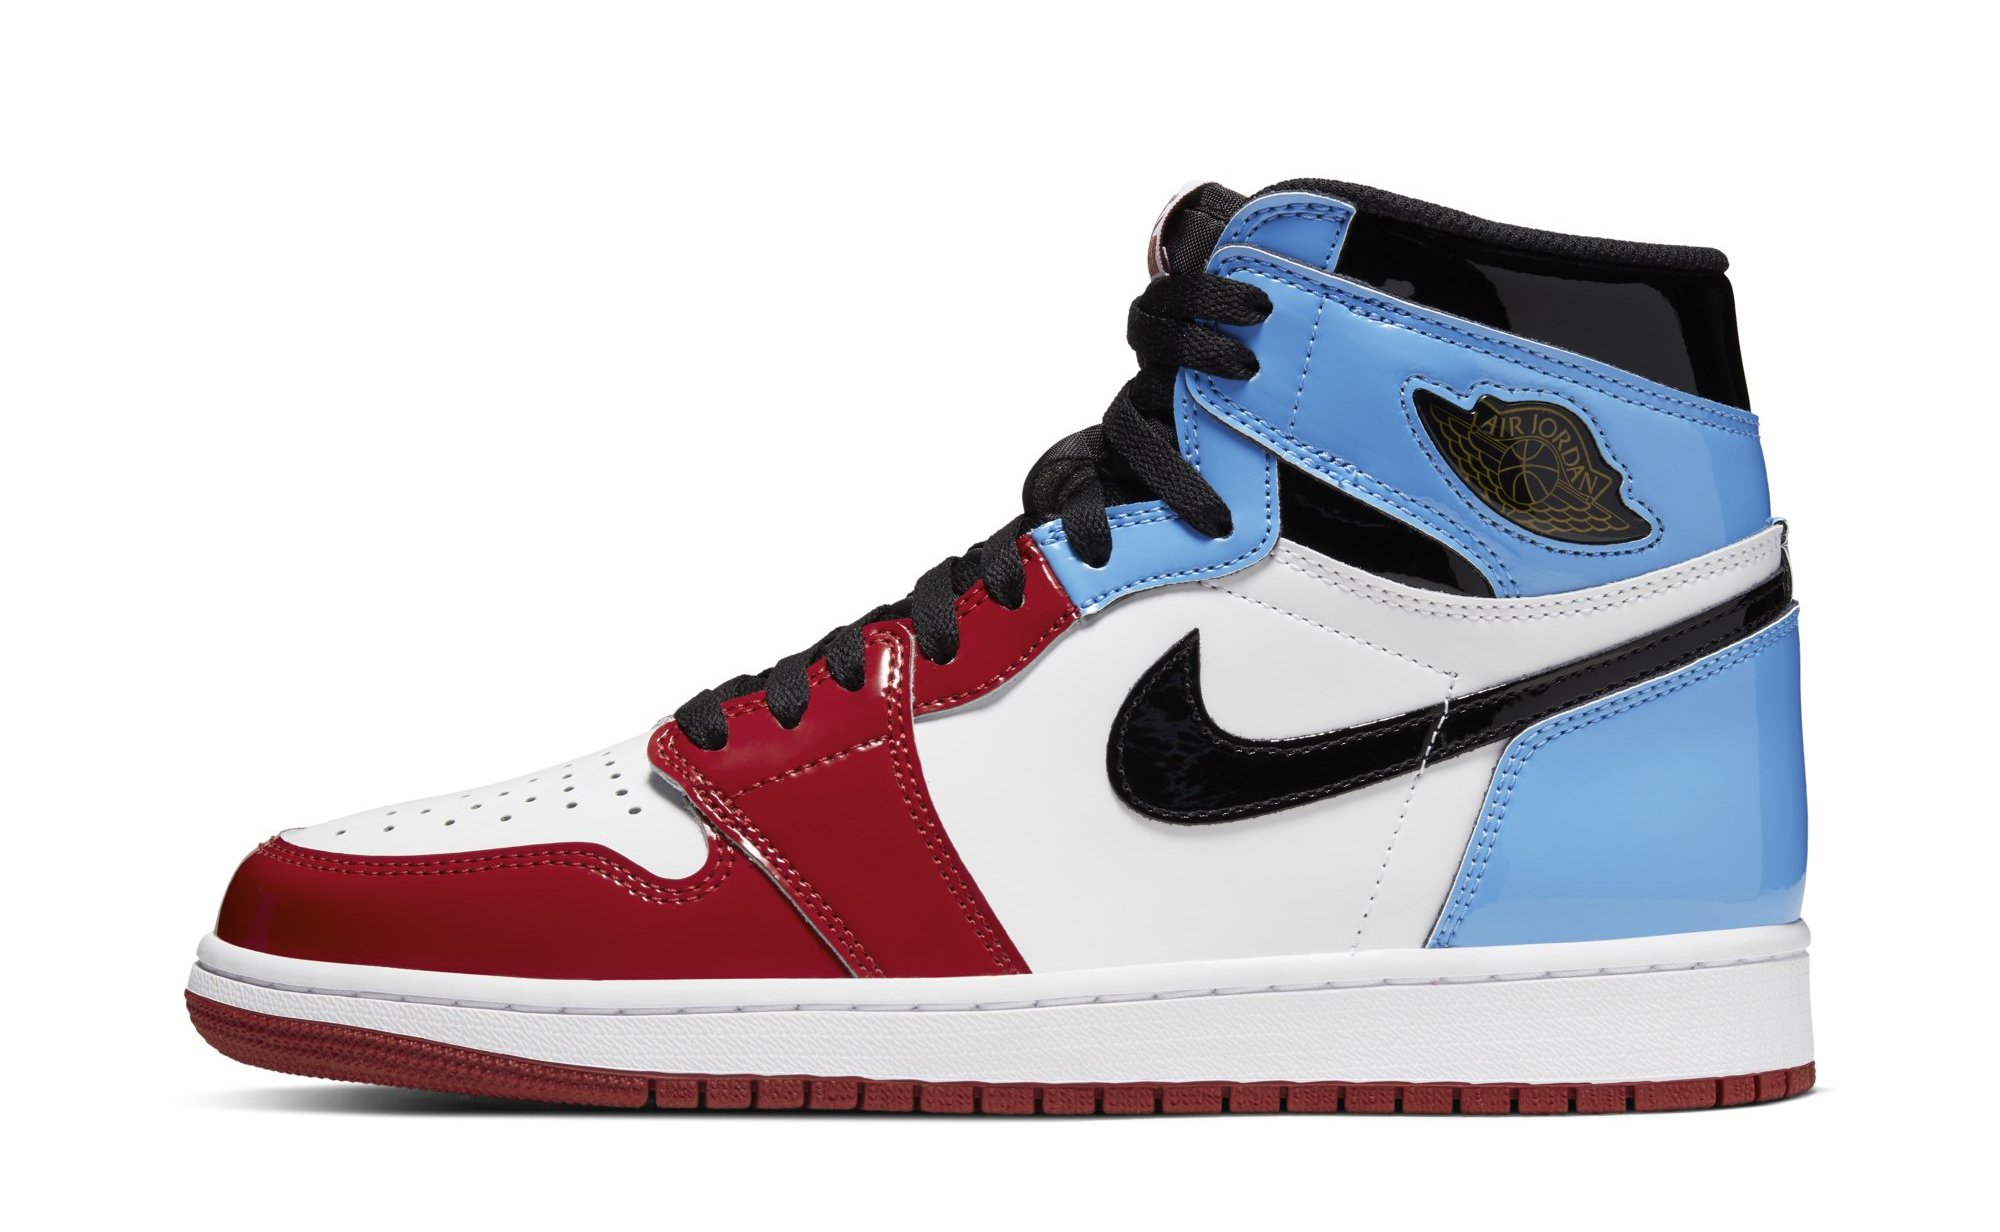 Air Jordan 1 High OG &#x27;Fearless&#x27; UNC to Chicago CK5666 100 (Lateral)